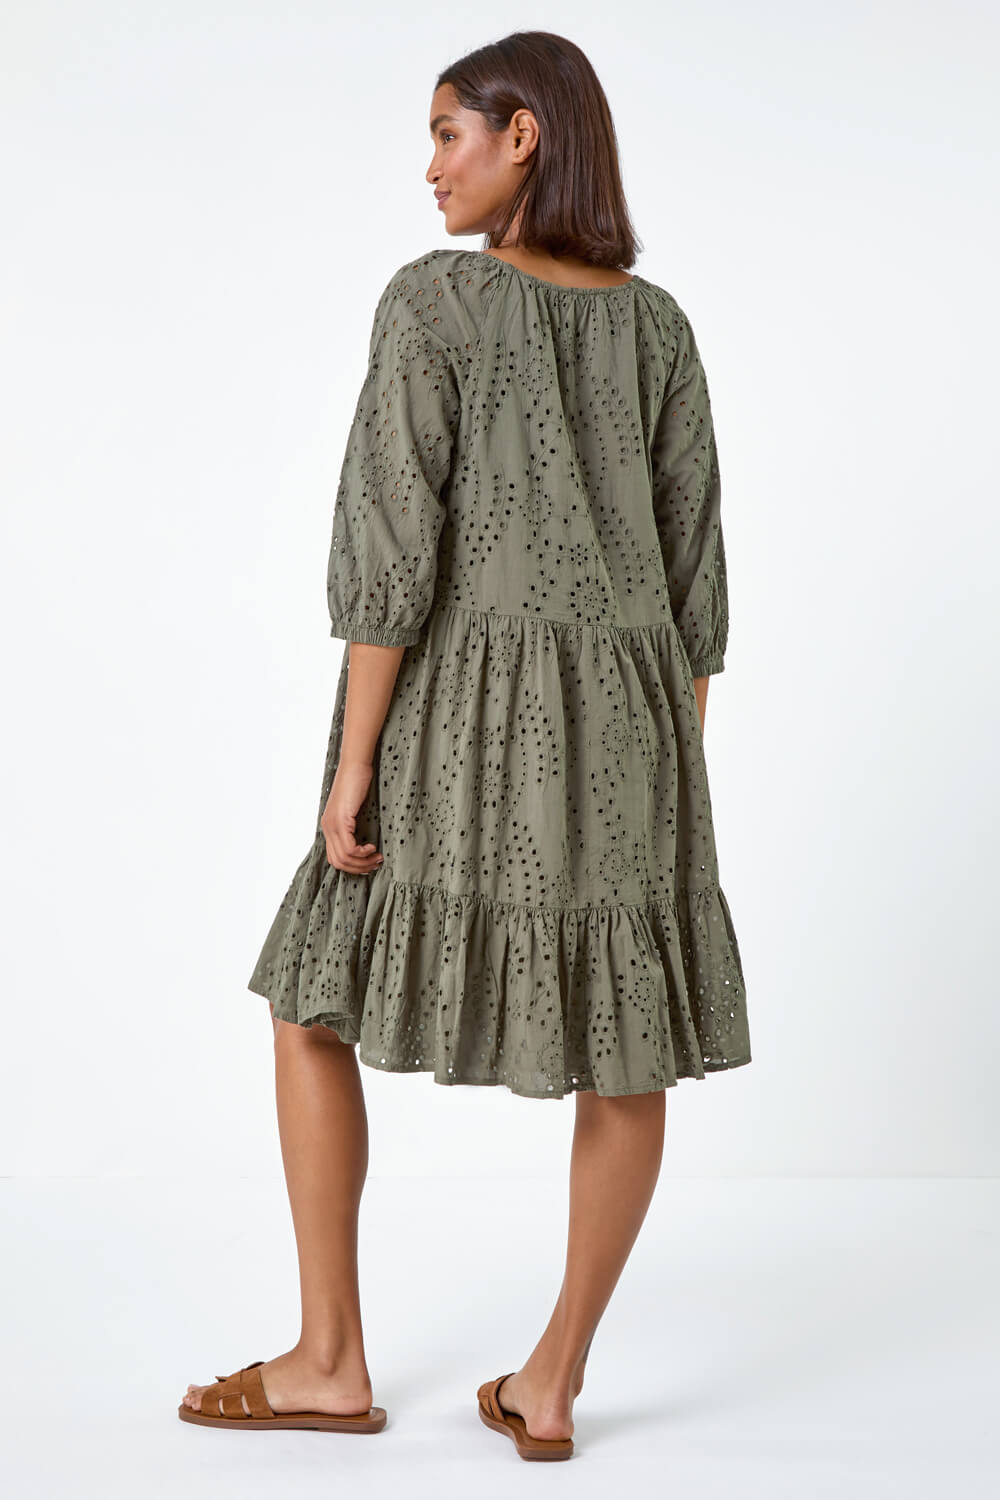 KHAKI Cotton Broderie Tiered Smock Dress, Image 3 of 7